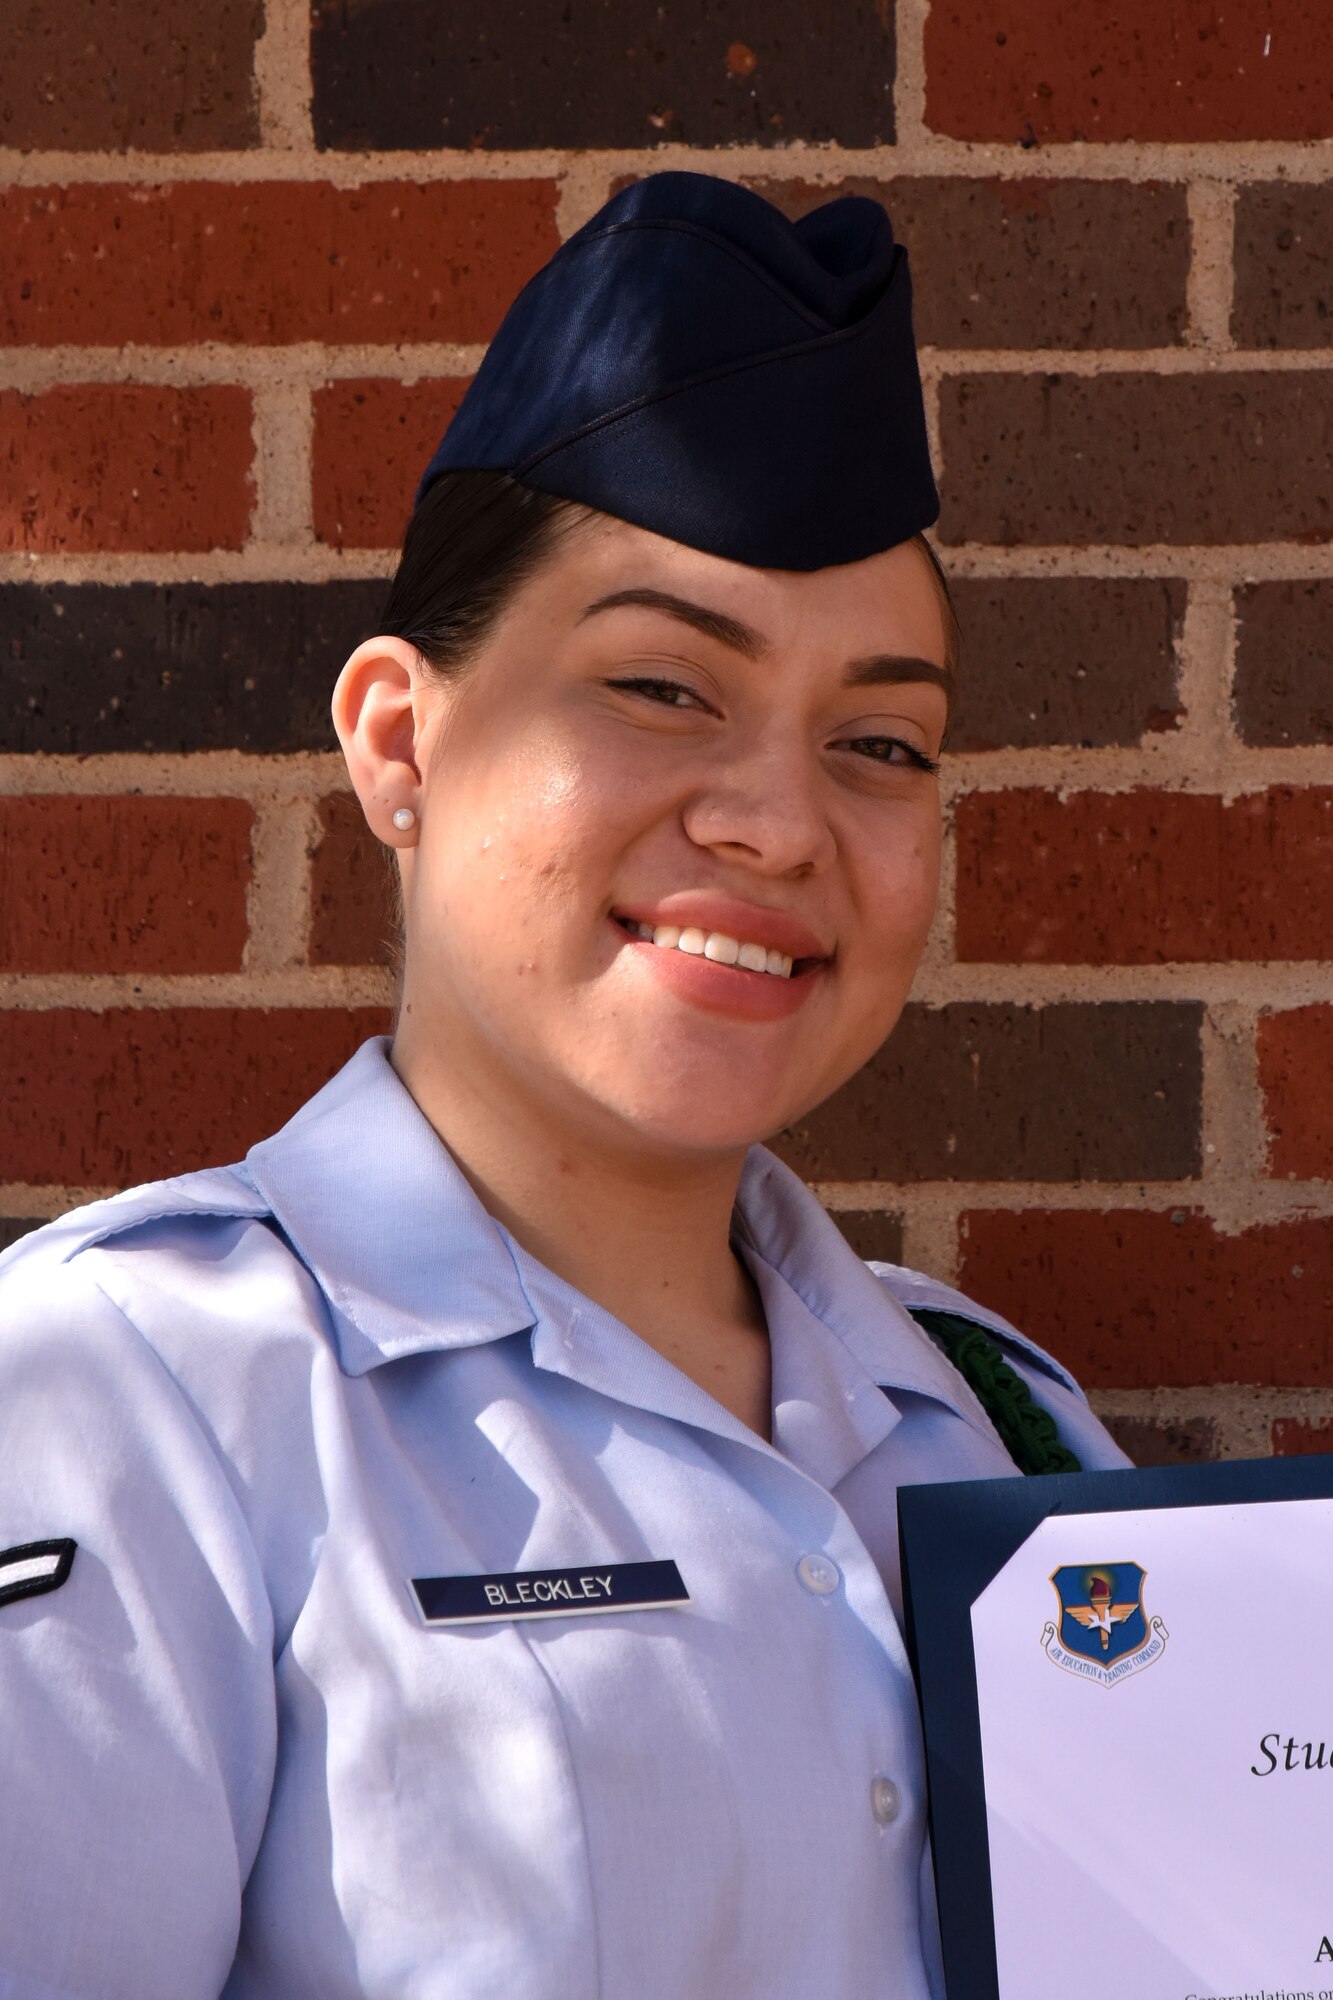 315th Training Squadron Student of the Month for Dec. 2017, U.S. Air Force Airman Nina Bleckley, 315th TRS trainee, stands outside the base theater on Goodfellow Air Force Base, Texas, Jan. 5, 2018. Bleckley is the Goodfellow Student of the Month spotlight for December 2017, a series highlighting Goodfellow students. (U.S. Air Force photo by Airman 1st Class Seraiah Hines/Released)